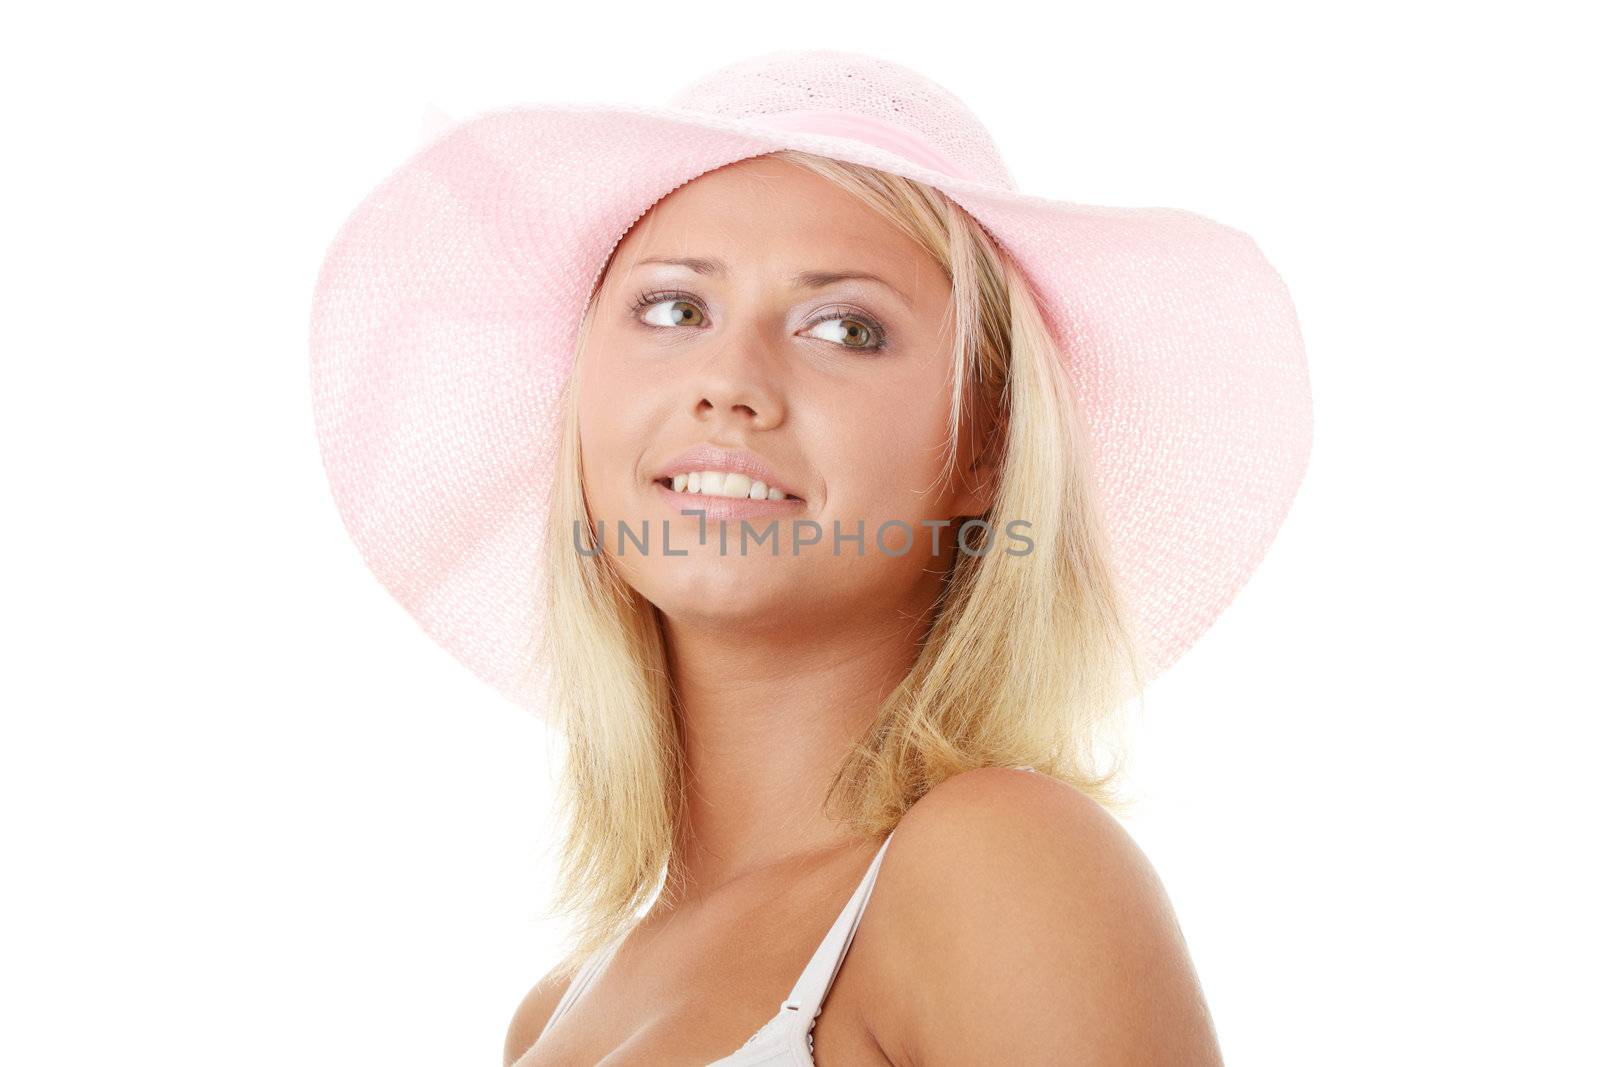 Young woman wearing a pink straw hat by BDS